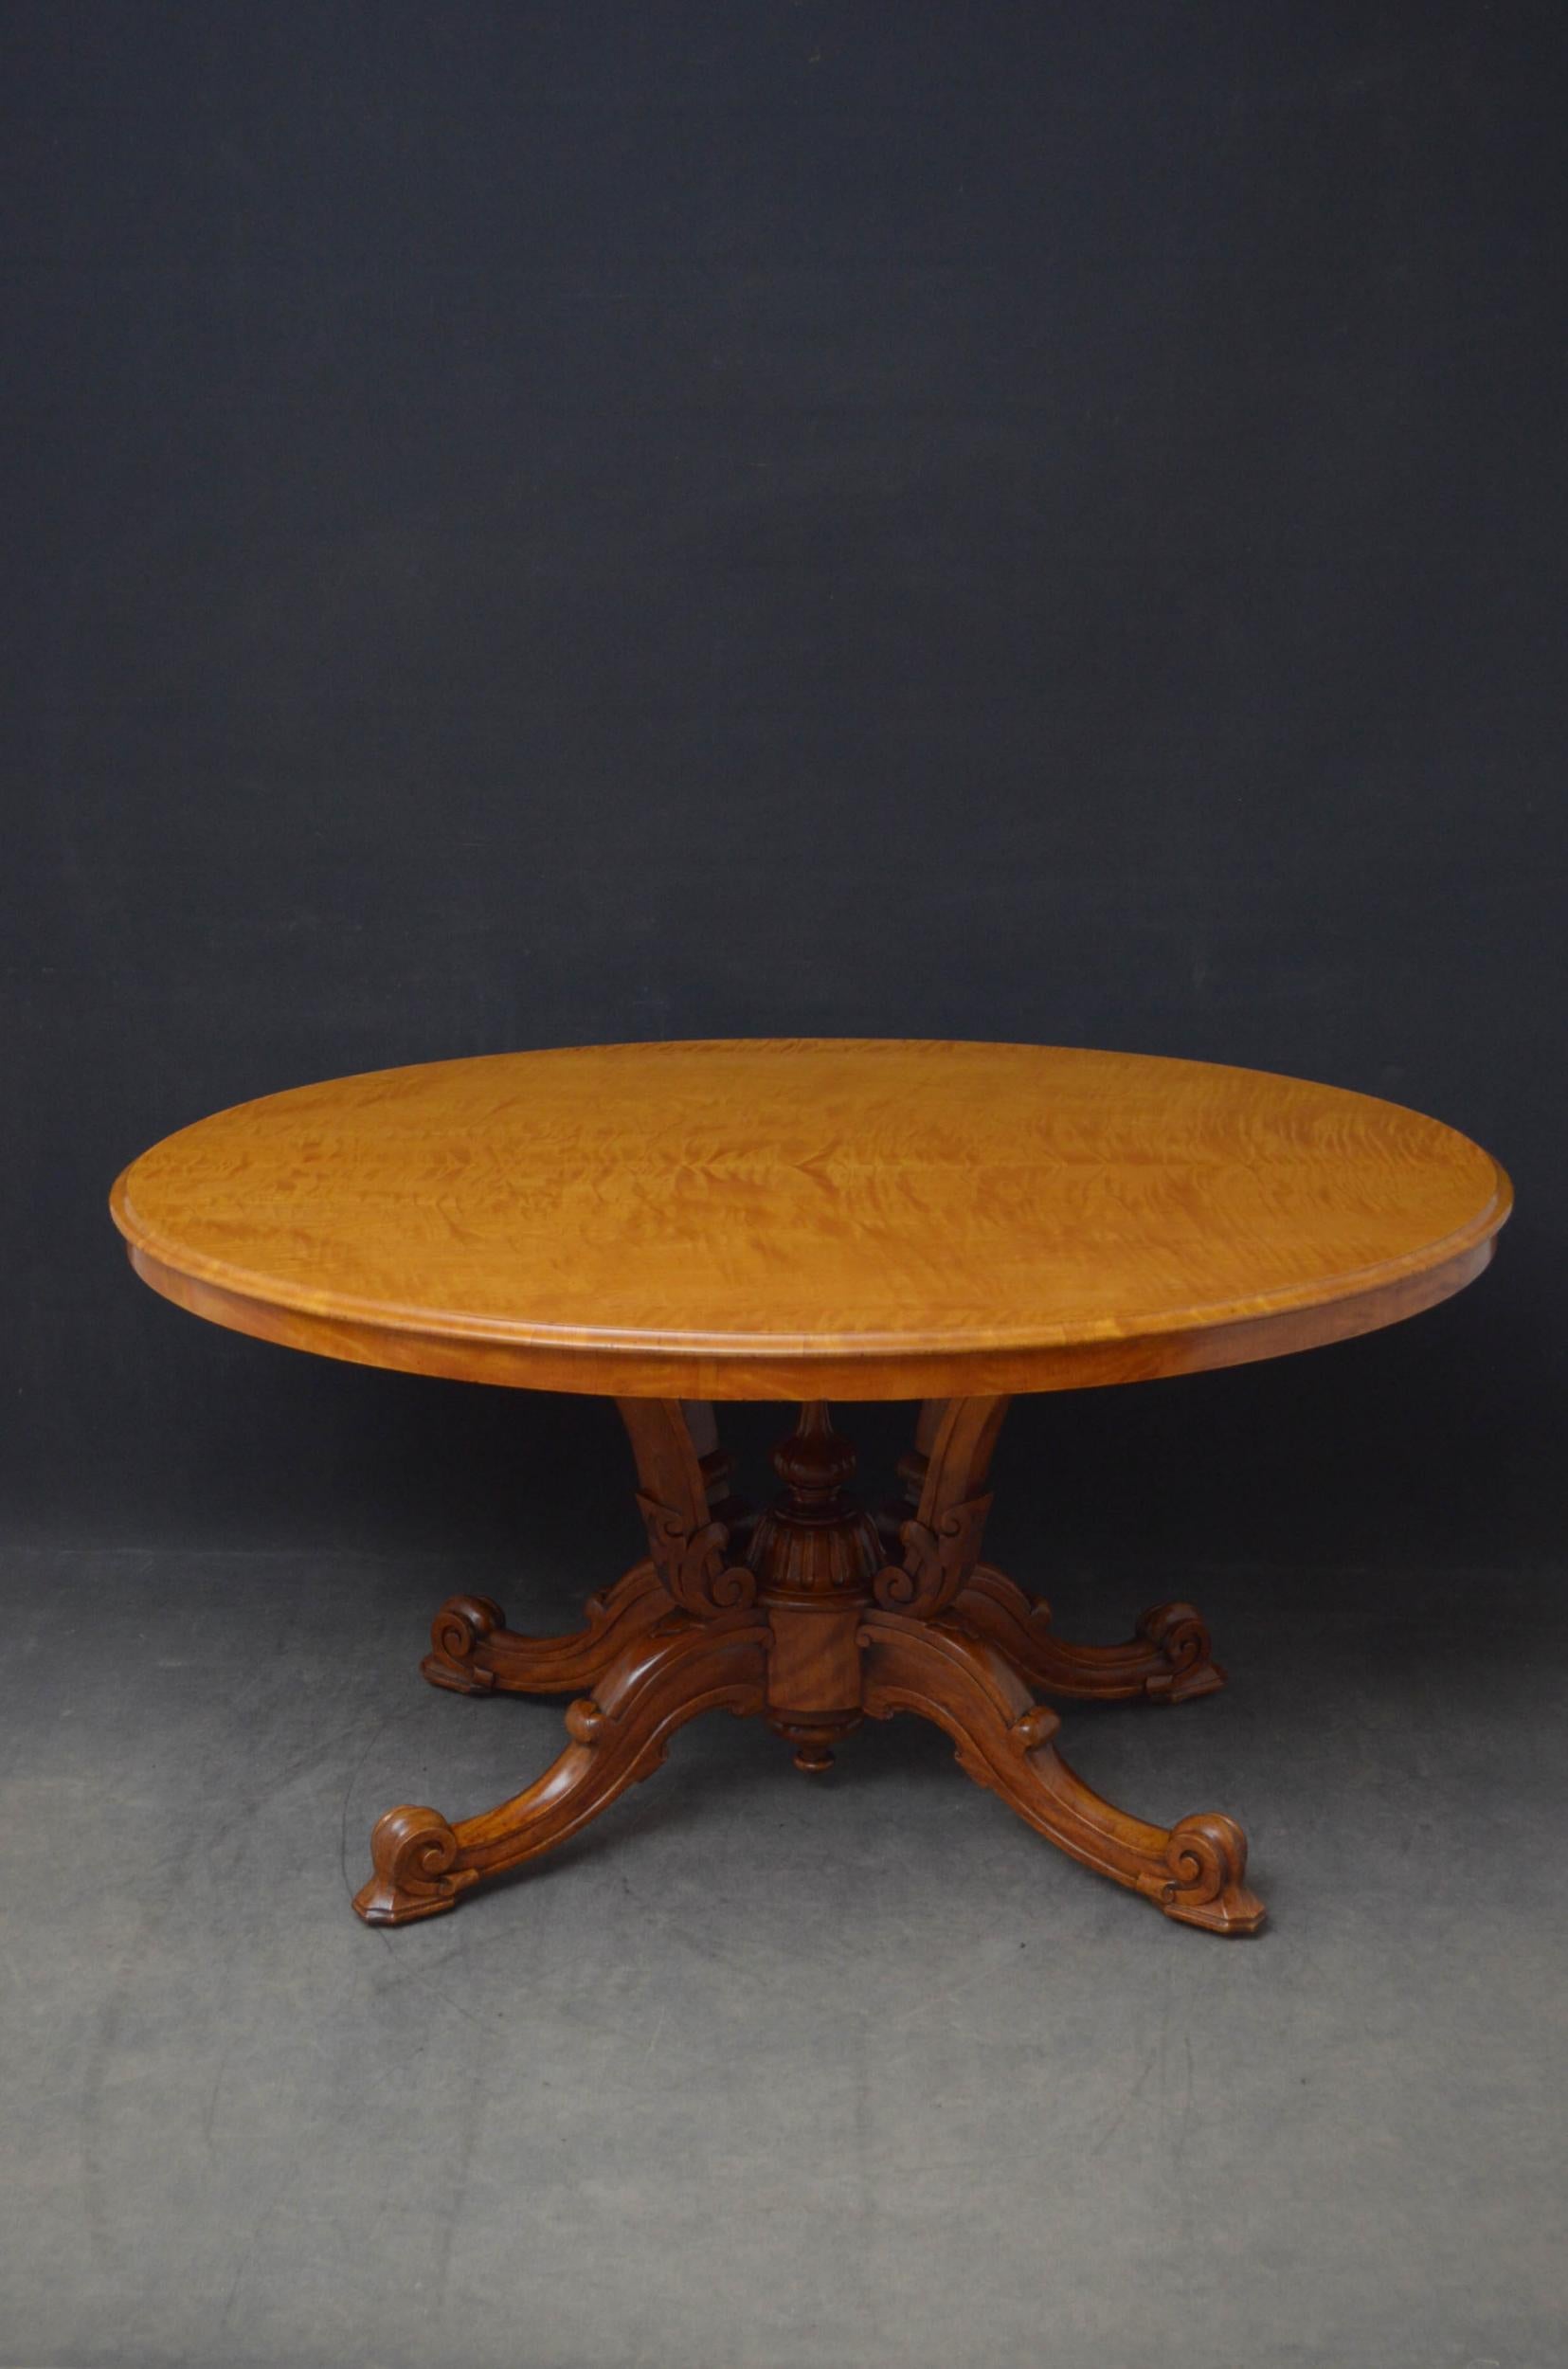 Sn5084 Outstanding Victorian satinwood centre table, having stunning oval top with moulded edge raised on four shaped and carved supports united by fluted finial and terminating in four cabriole legs with scroll feet, standing on original brass